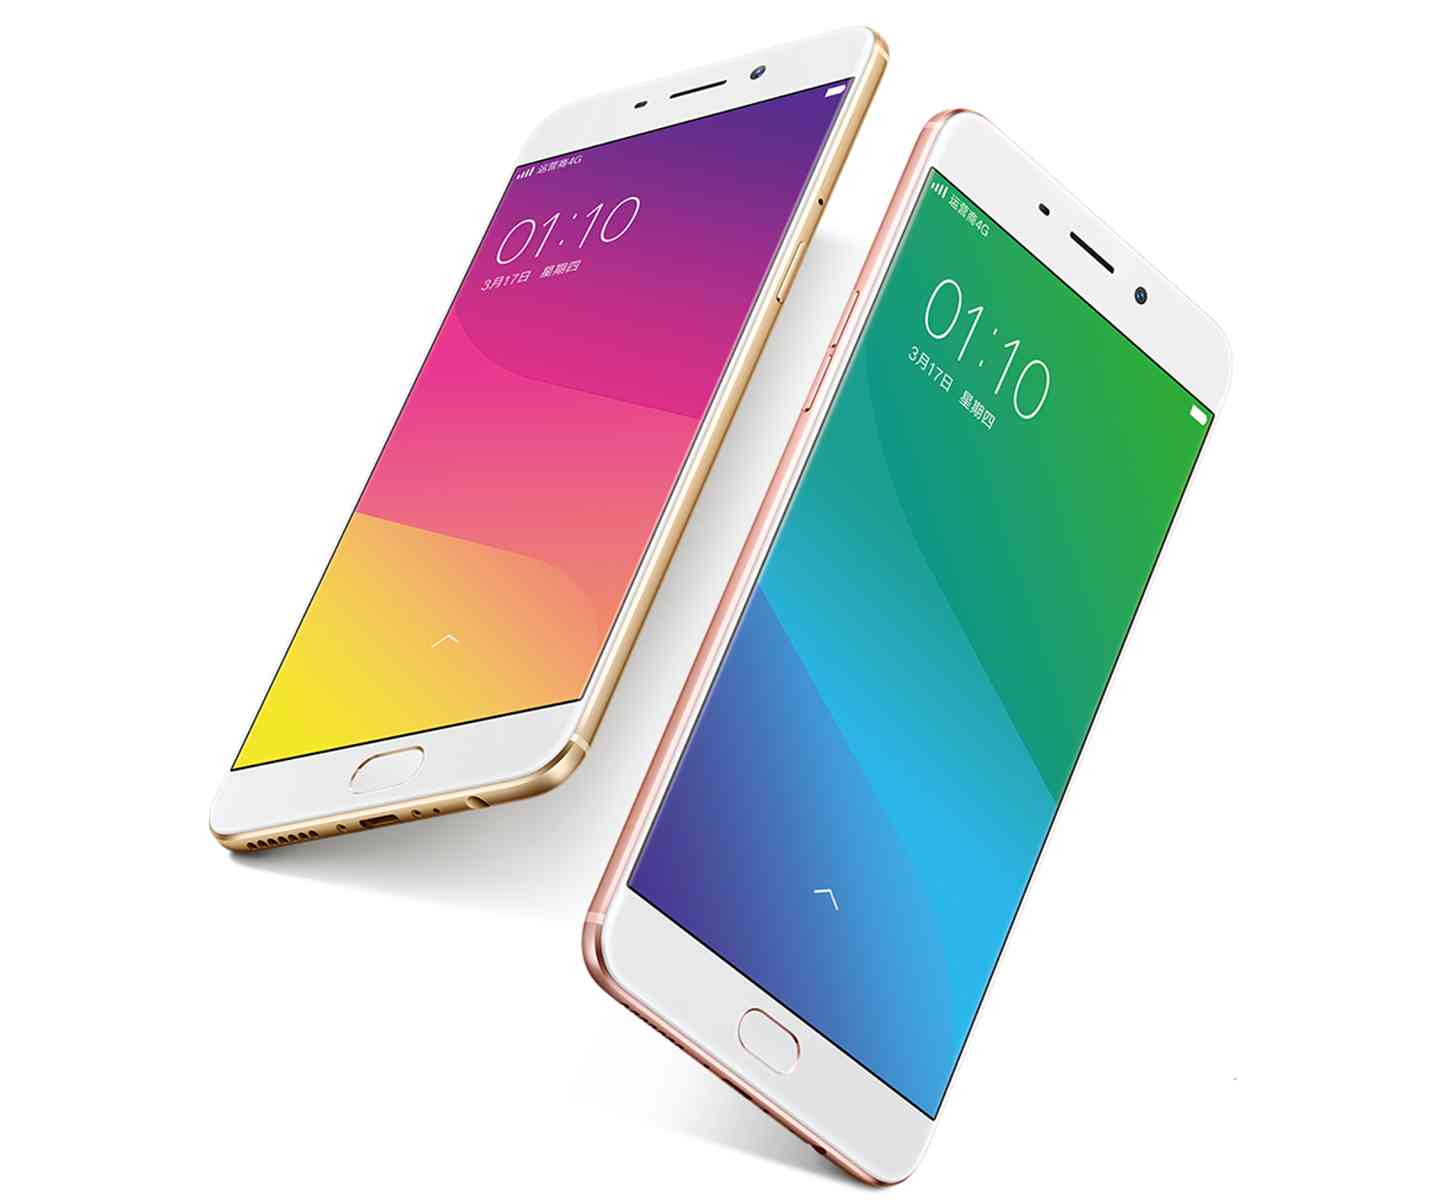 Oppo R9, R9 Plus official